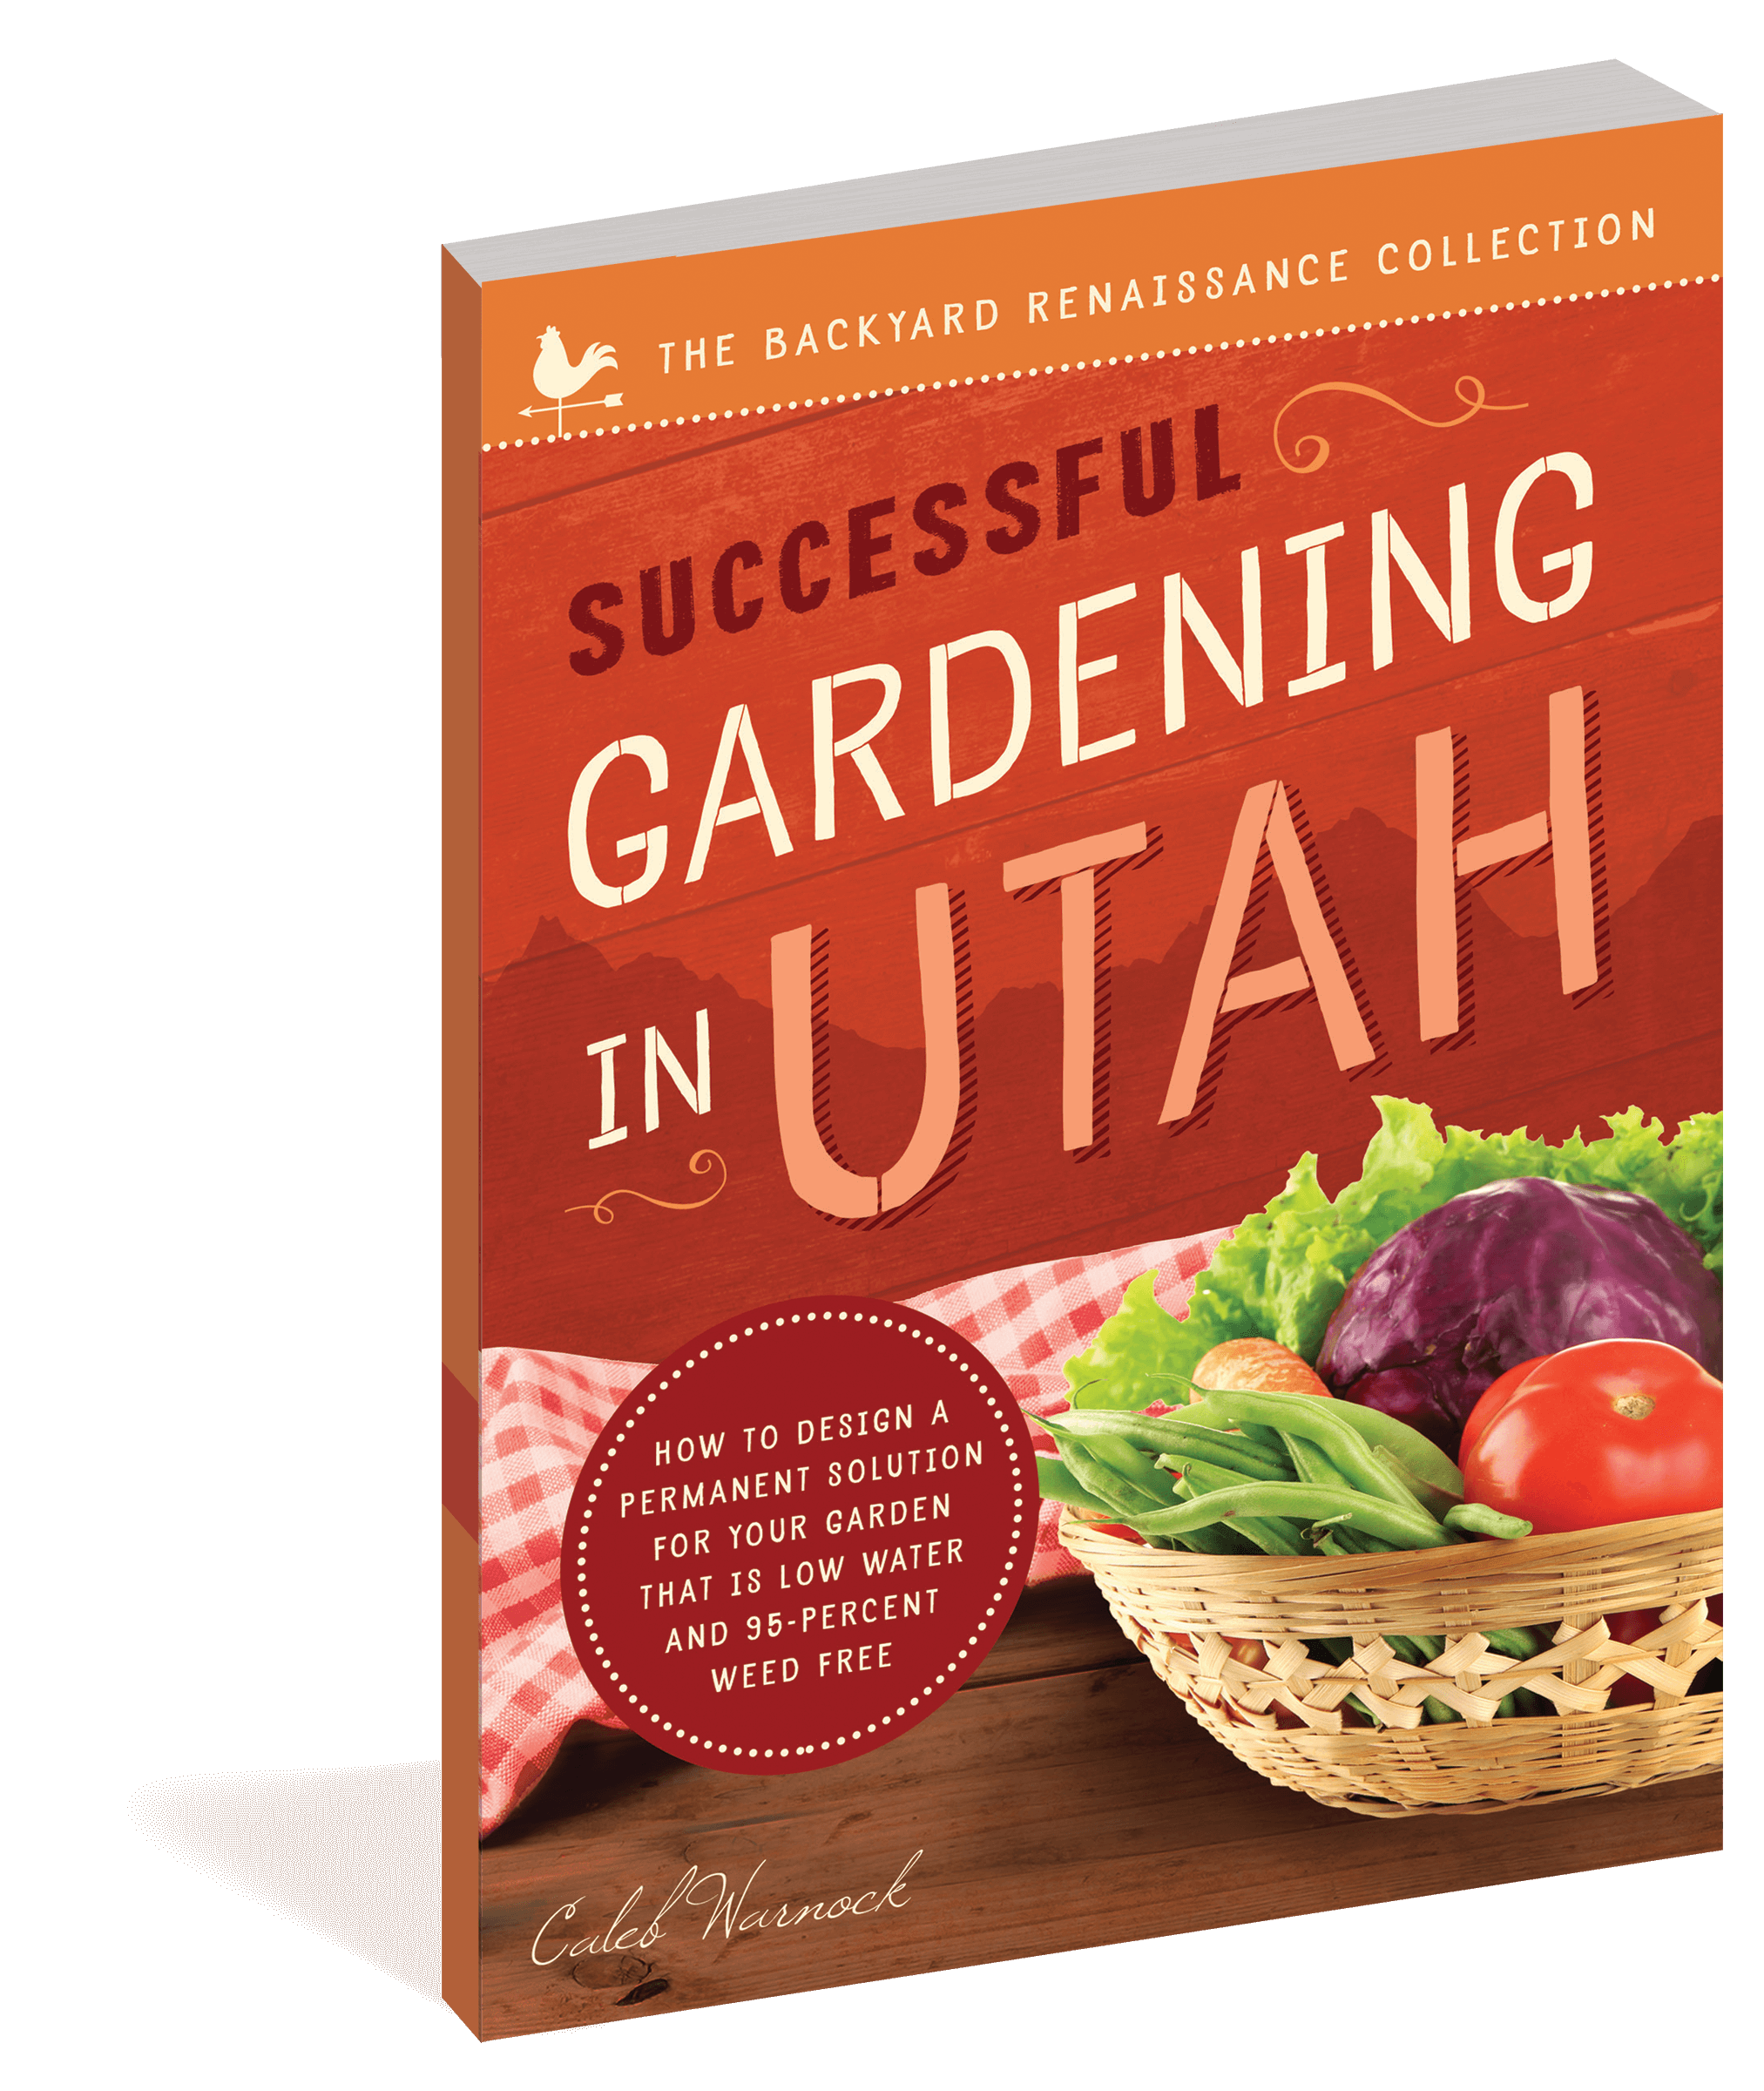 The cover of the book Successful Gardening in Utah.